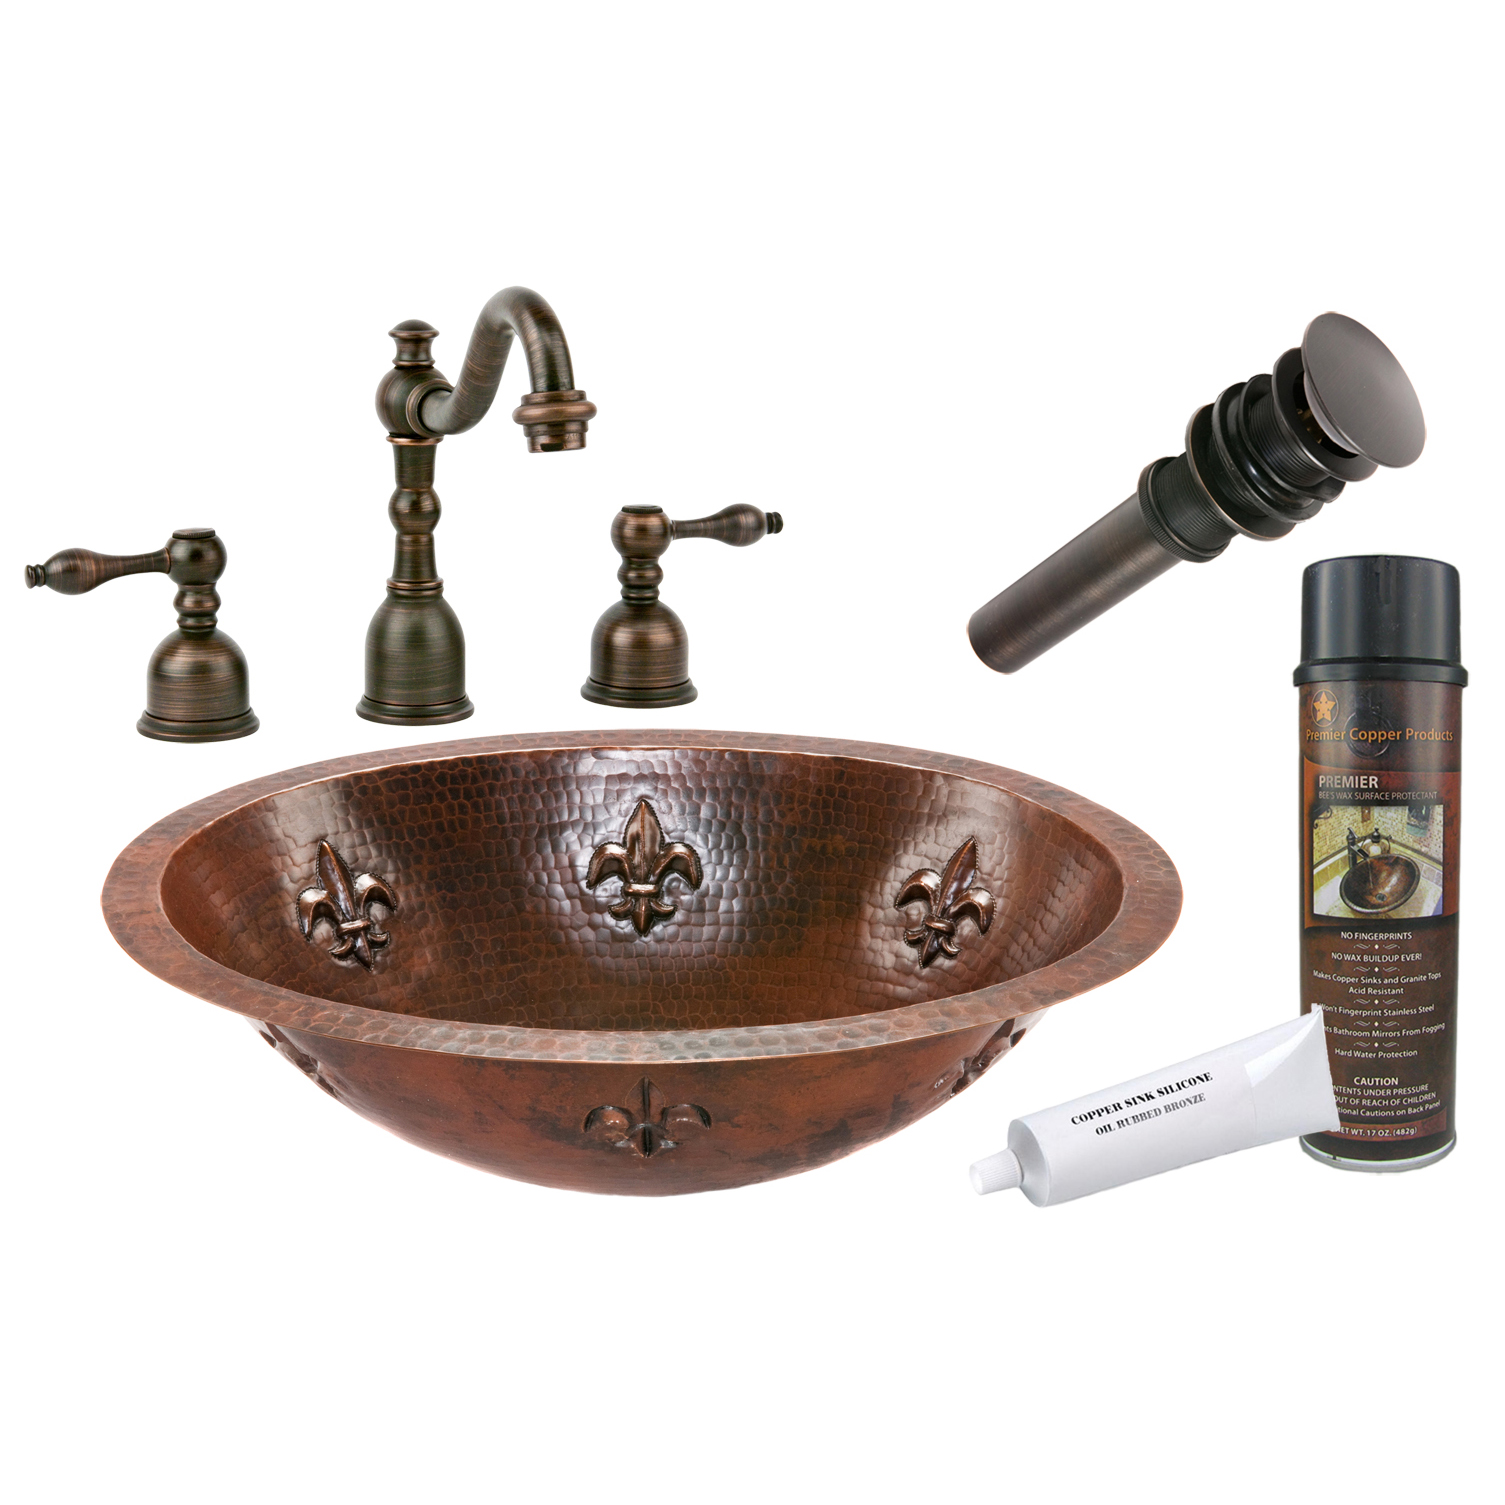 Oval Fleur De Lis Under Counter Hammered Copper Sink, Faucet And Accessories Package, Oil Rubbed Bronze